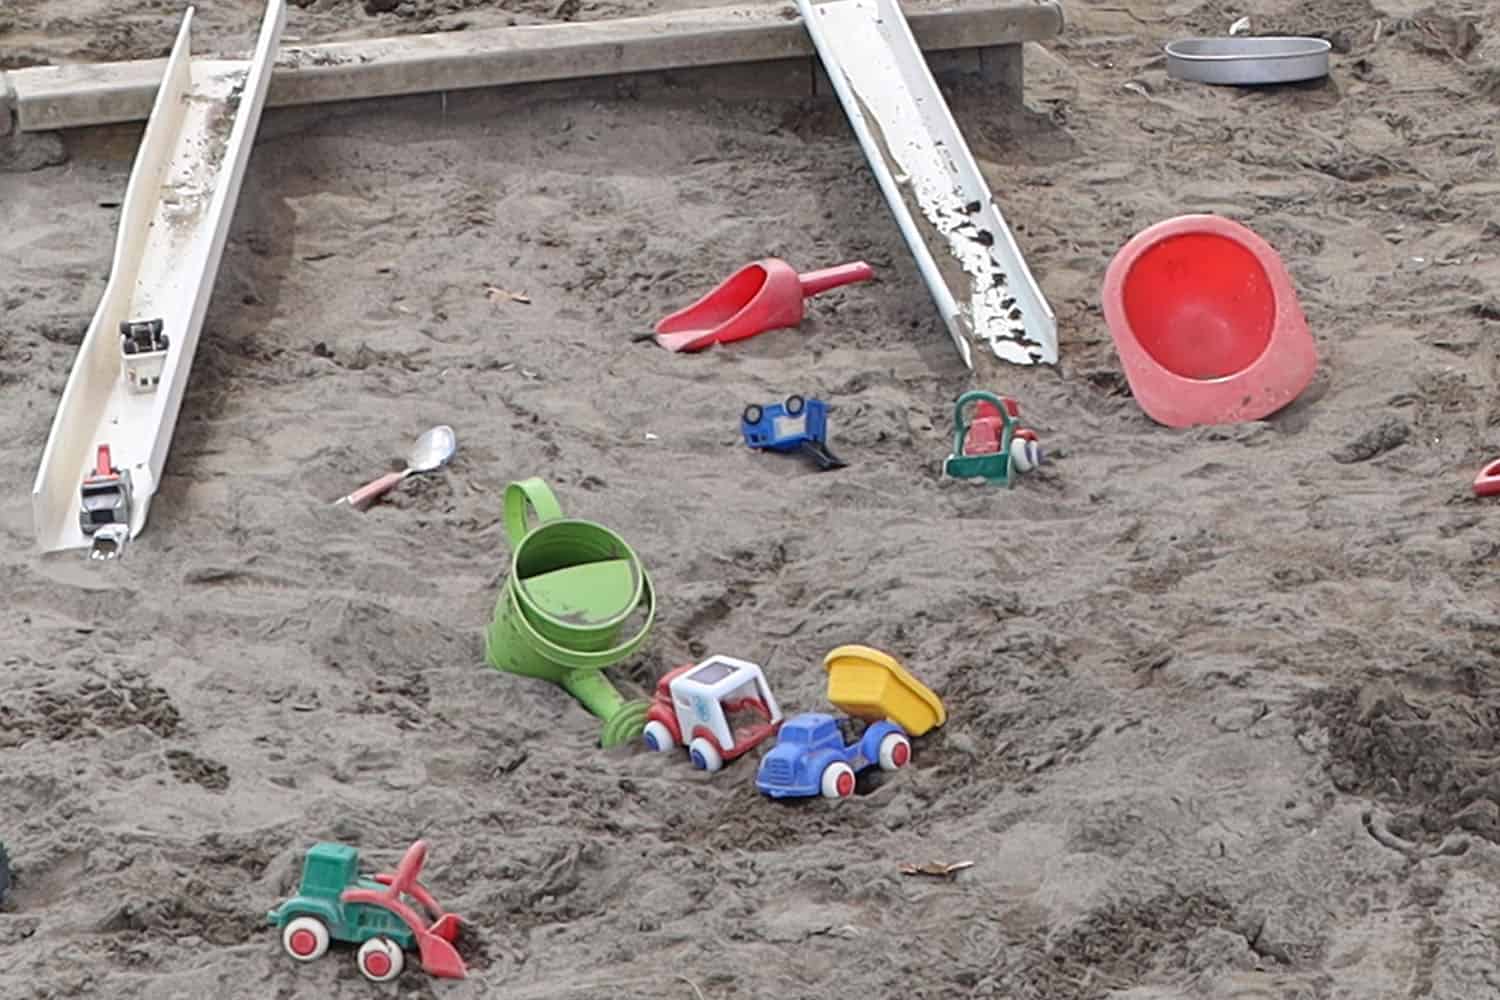 sandpit toys and health and safety